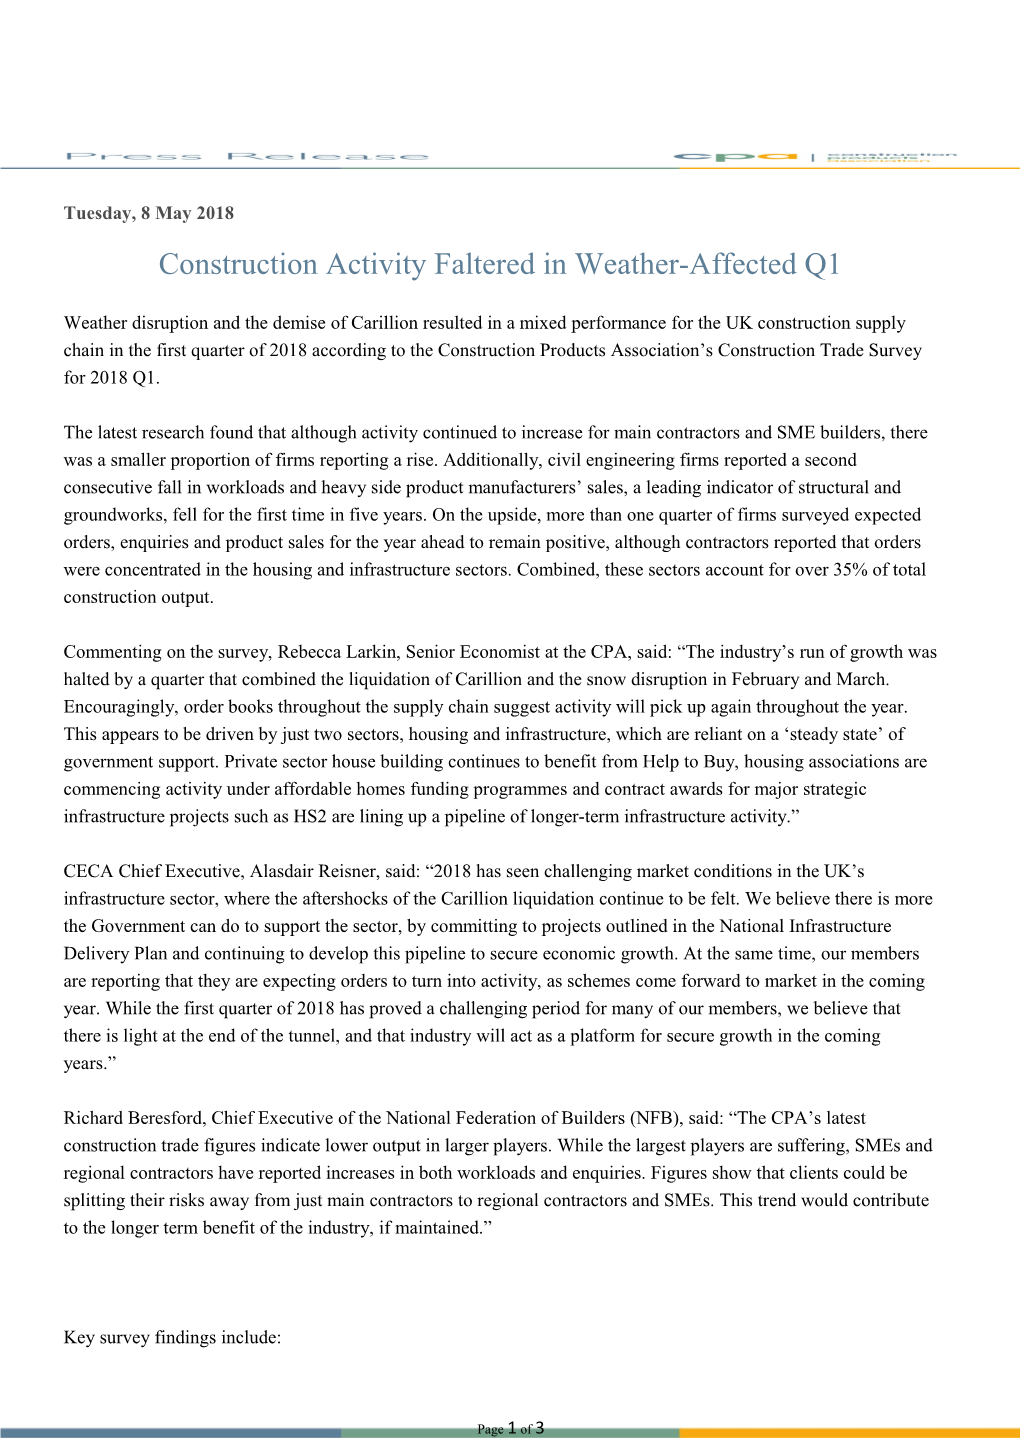 Construction Activity Faltered in Weather-Affected Q1